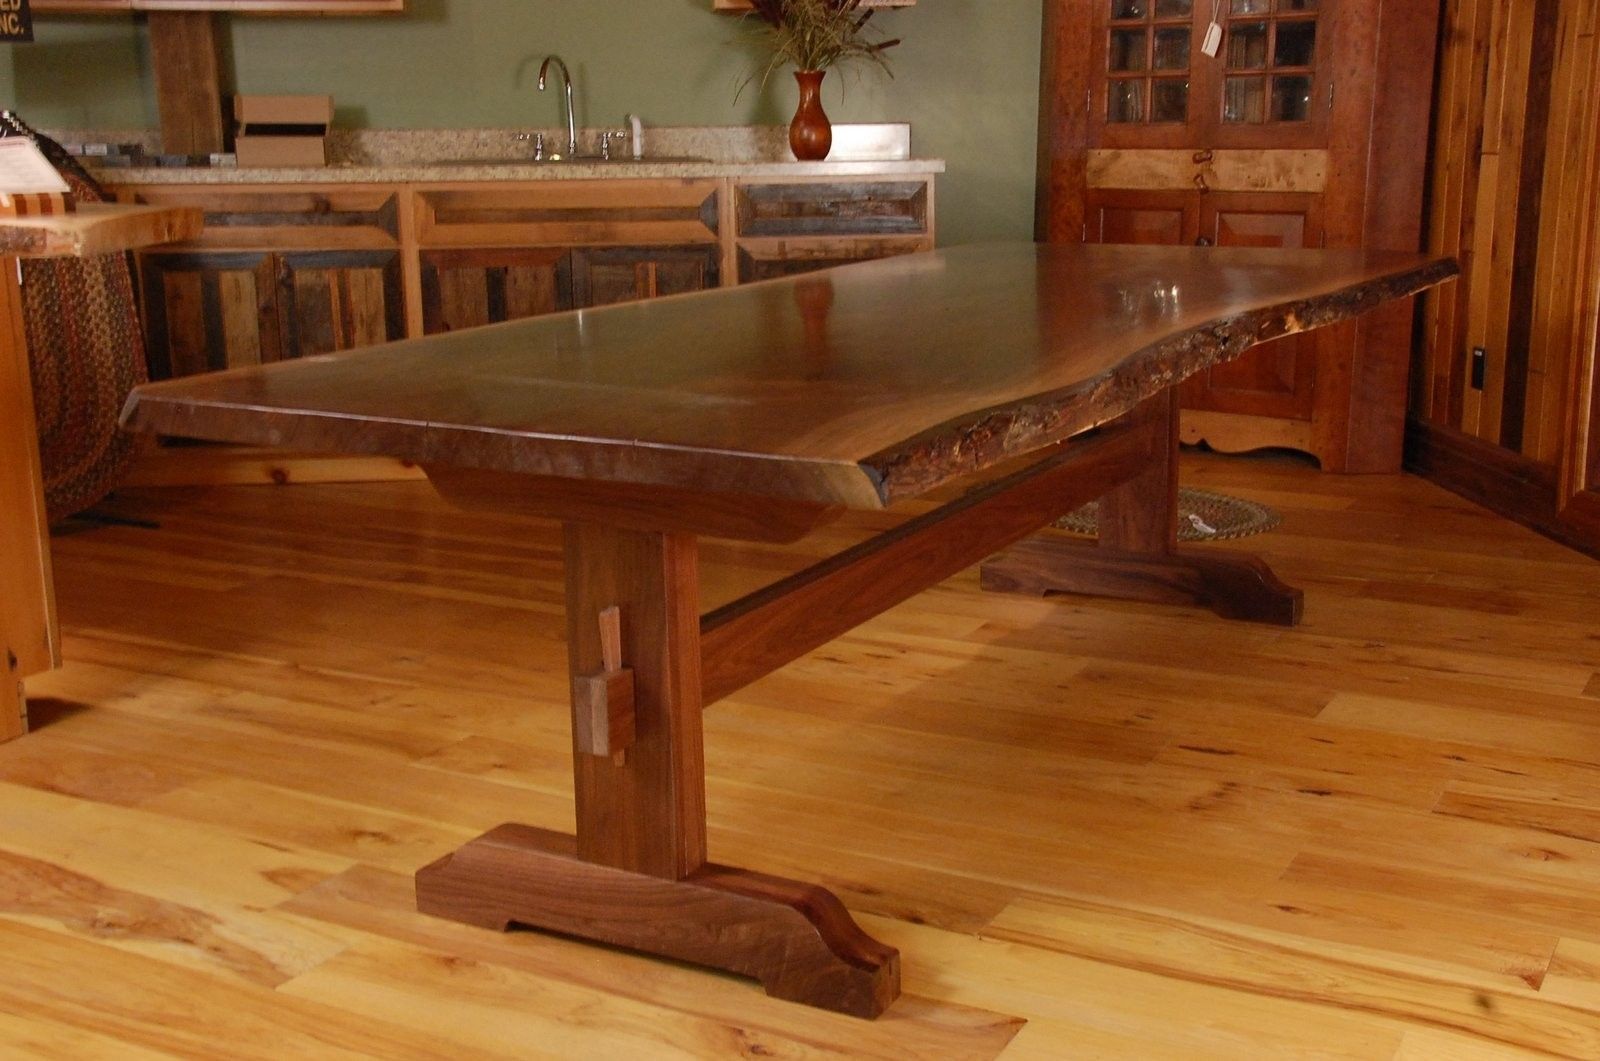 Hand Crafted Live Edge Walnut Slab Trestle Dining Table By Corey Morgan Wood Works Custommade Com